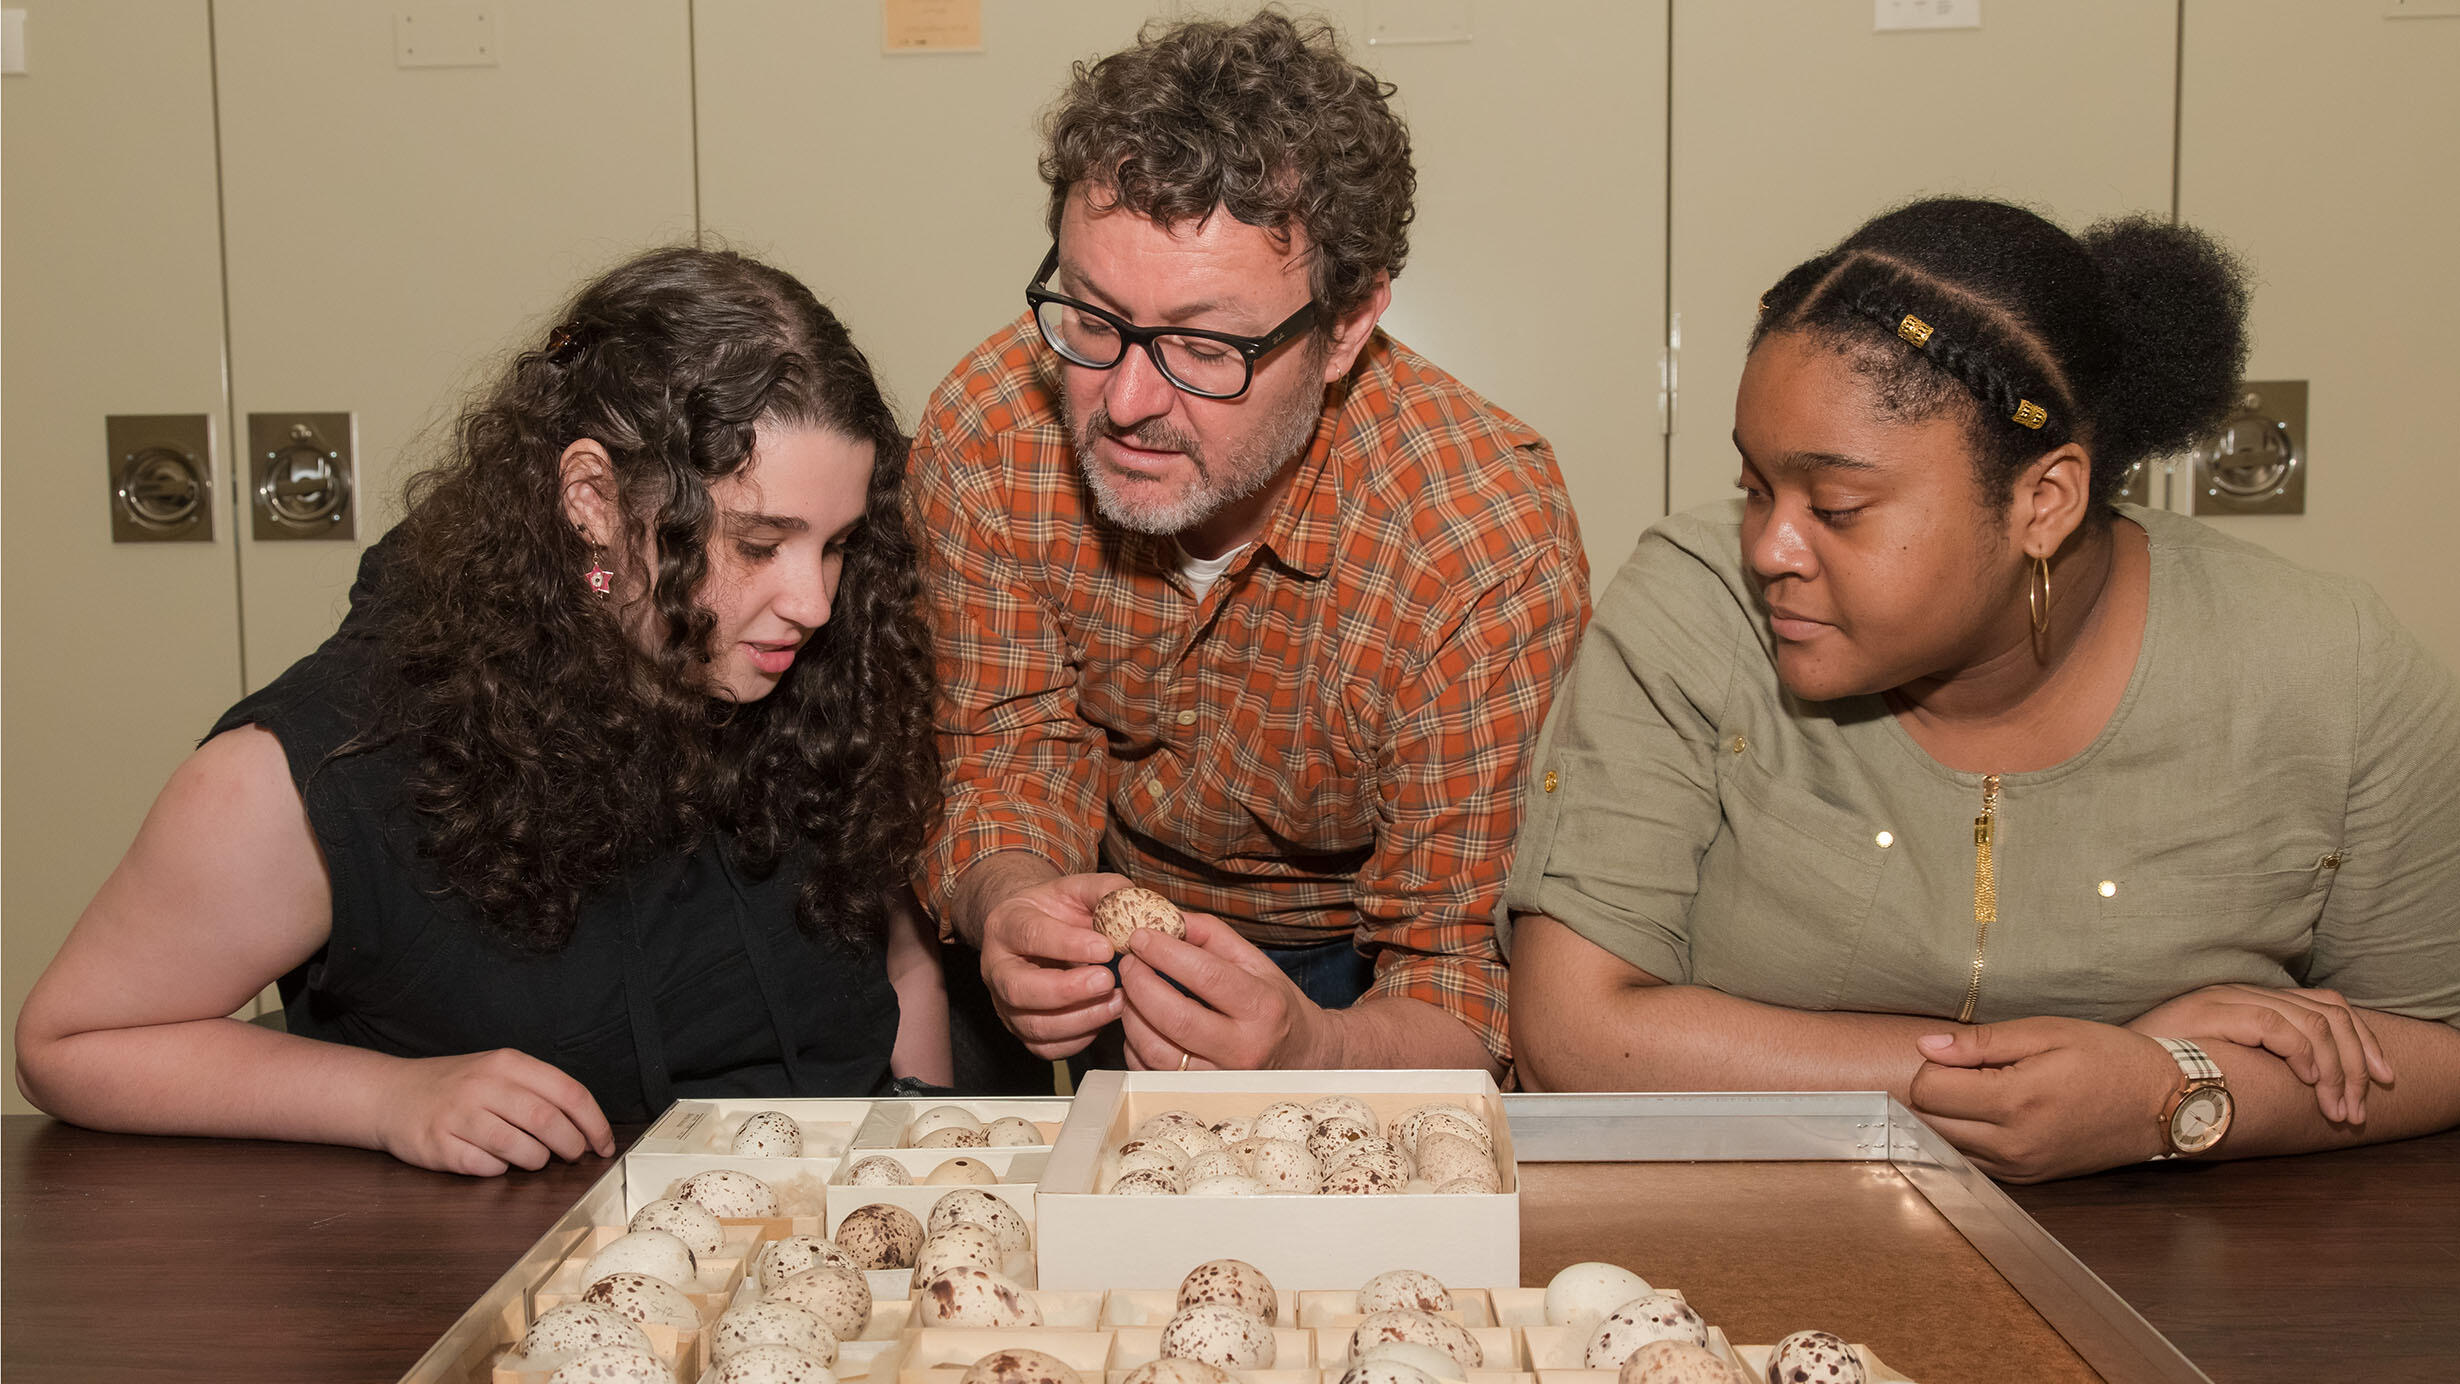 A SRMP instructor and two students examine egg specimens on a table.